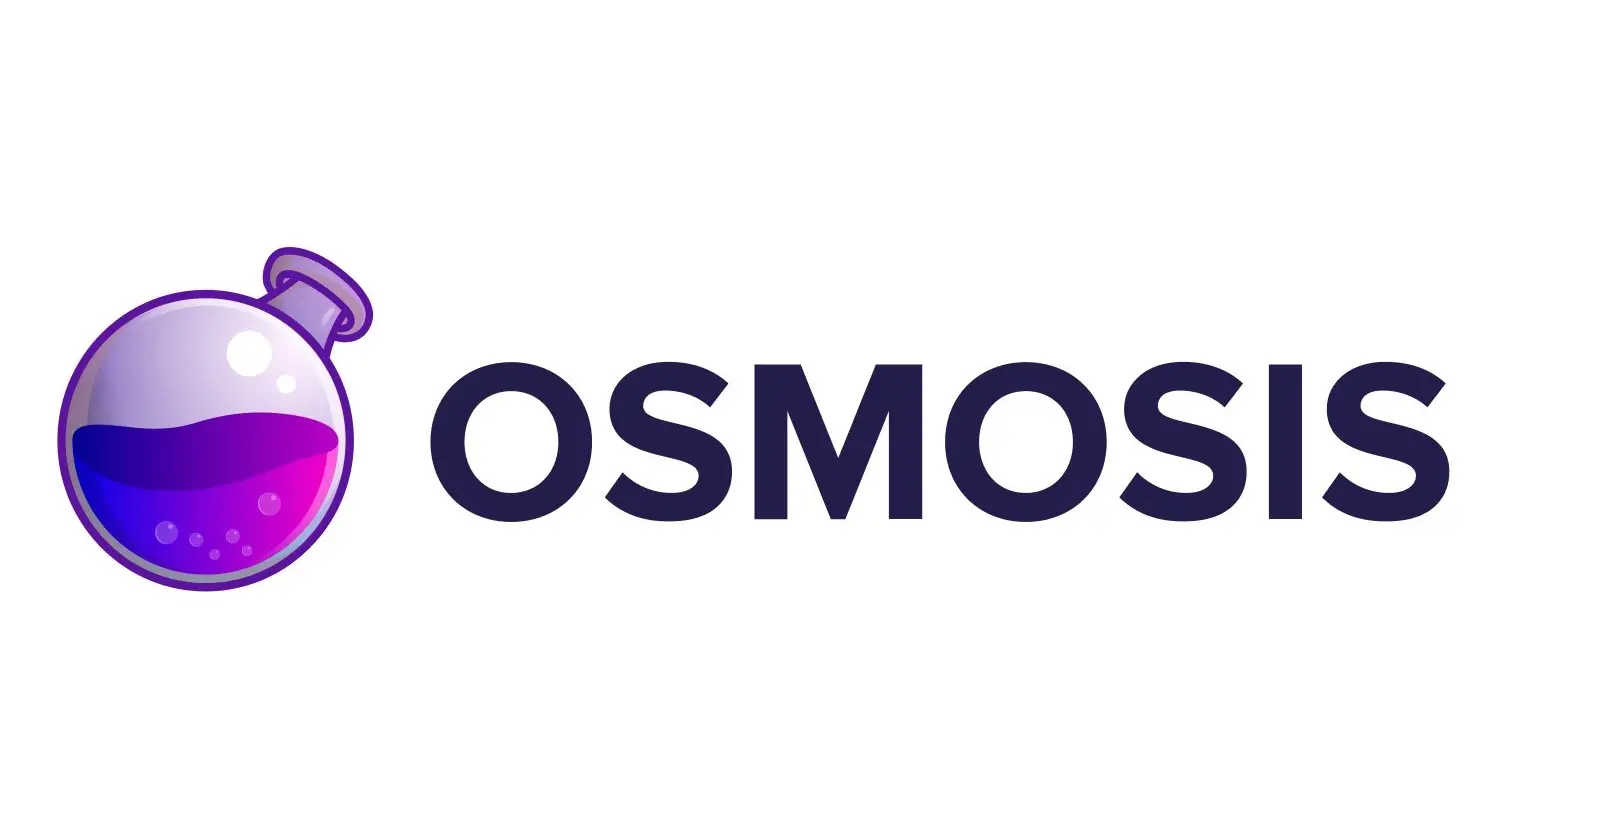 Osmosis Exploited for $5 Million Worth of OSMO Tokens